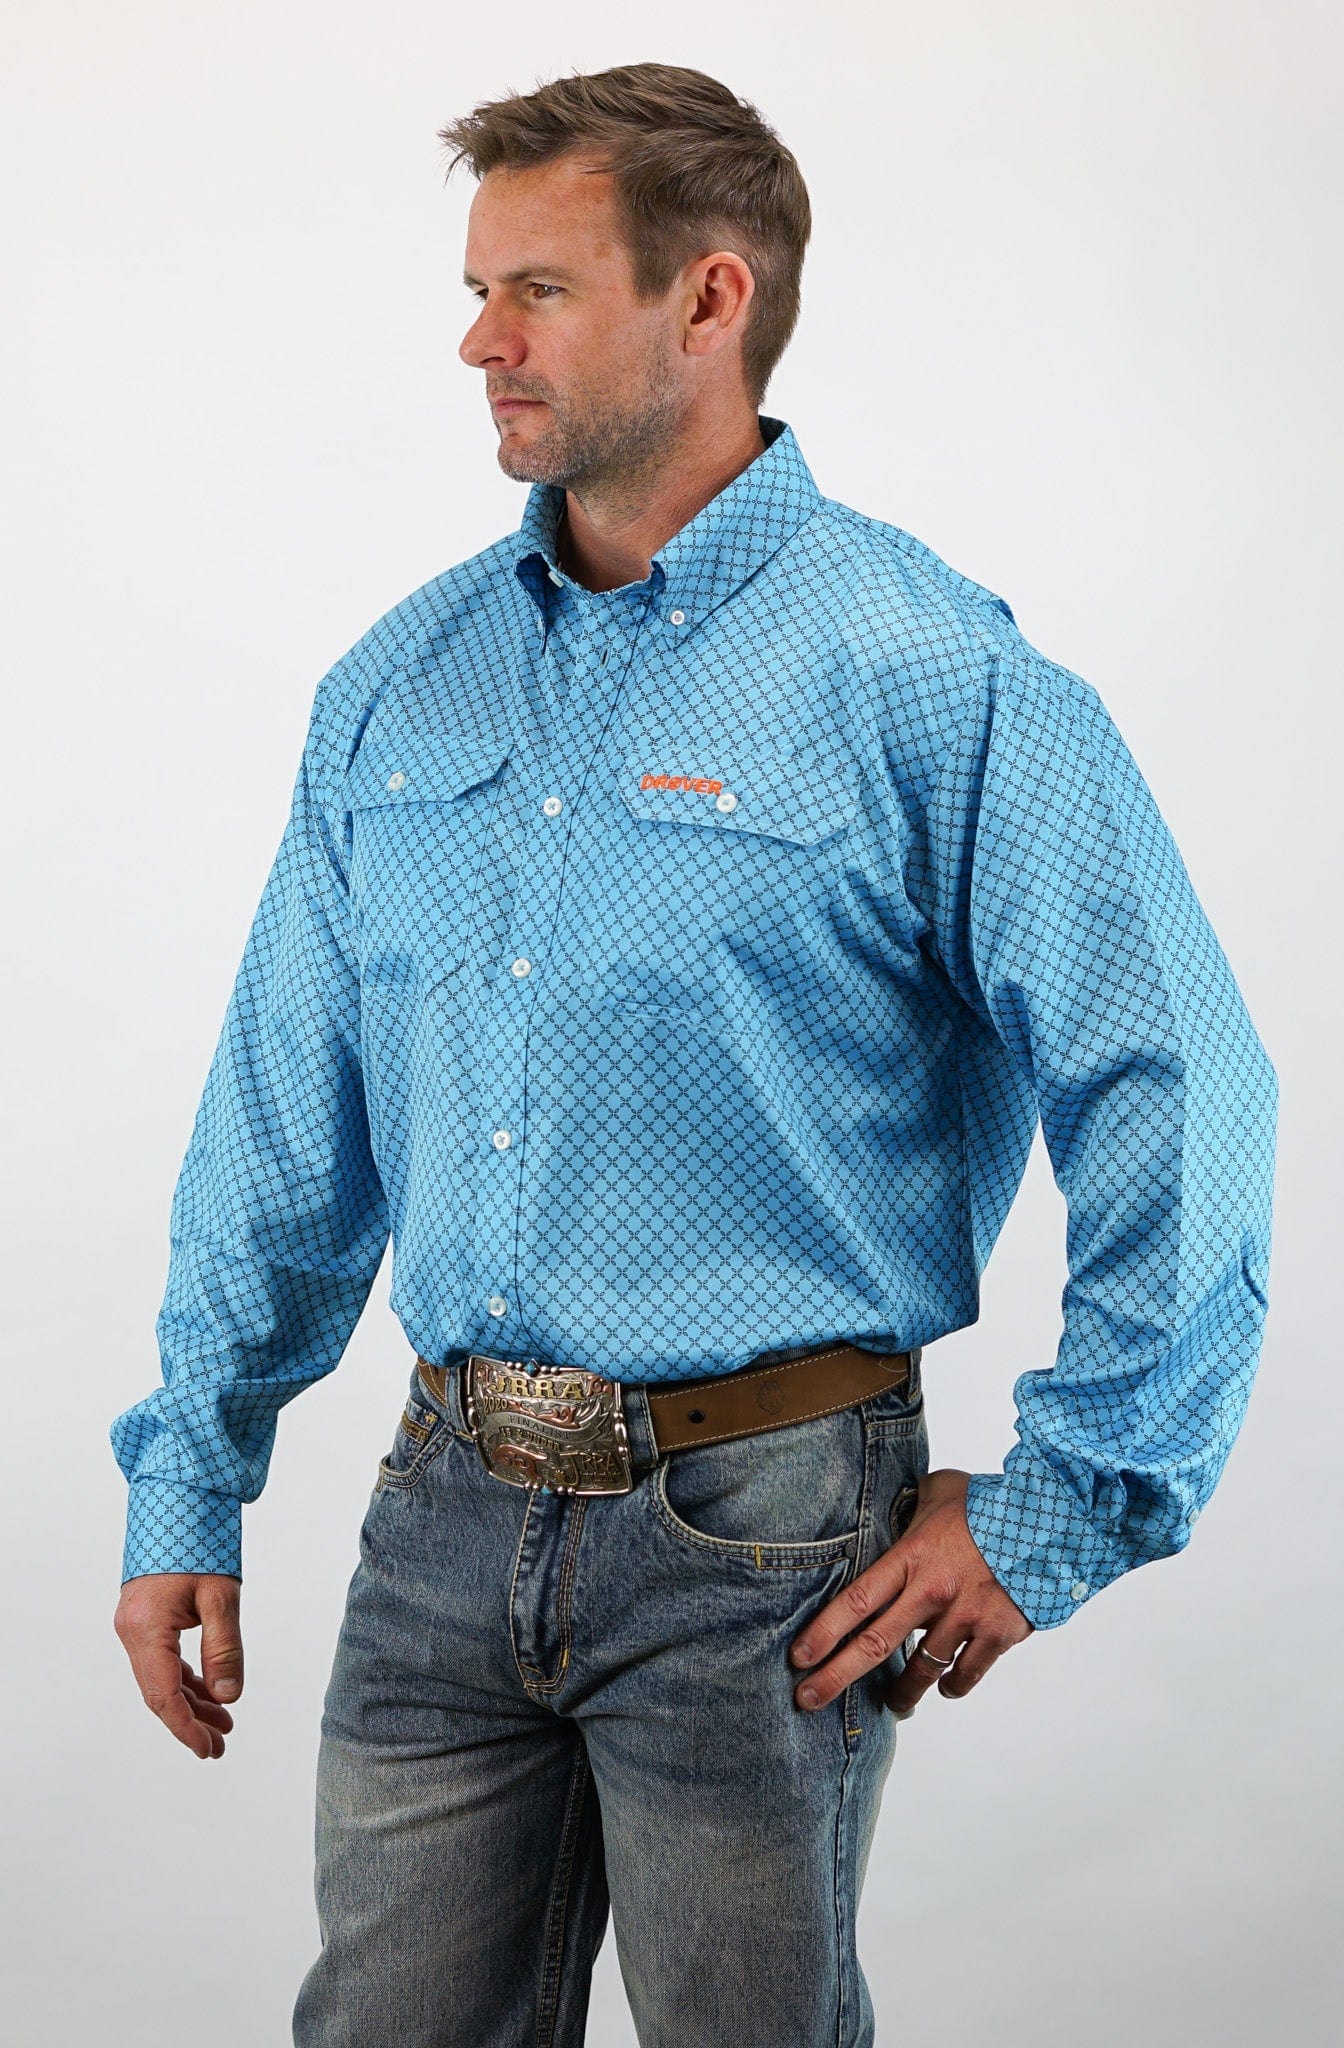 Drover Cowboy Threads Shirts Signature Series - Catawampus - Vent Shirt, Print, Classic Fit Shirt (Blue with Black flowers)